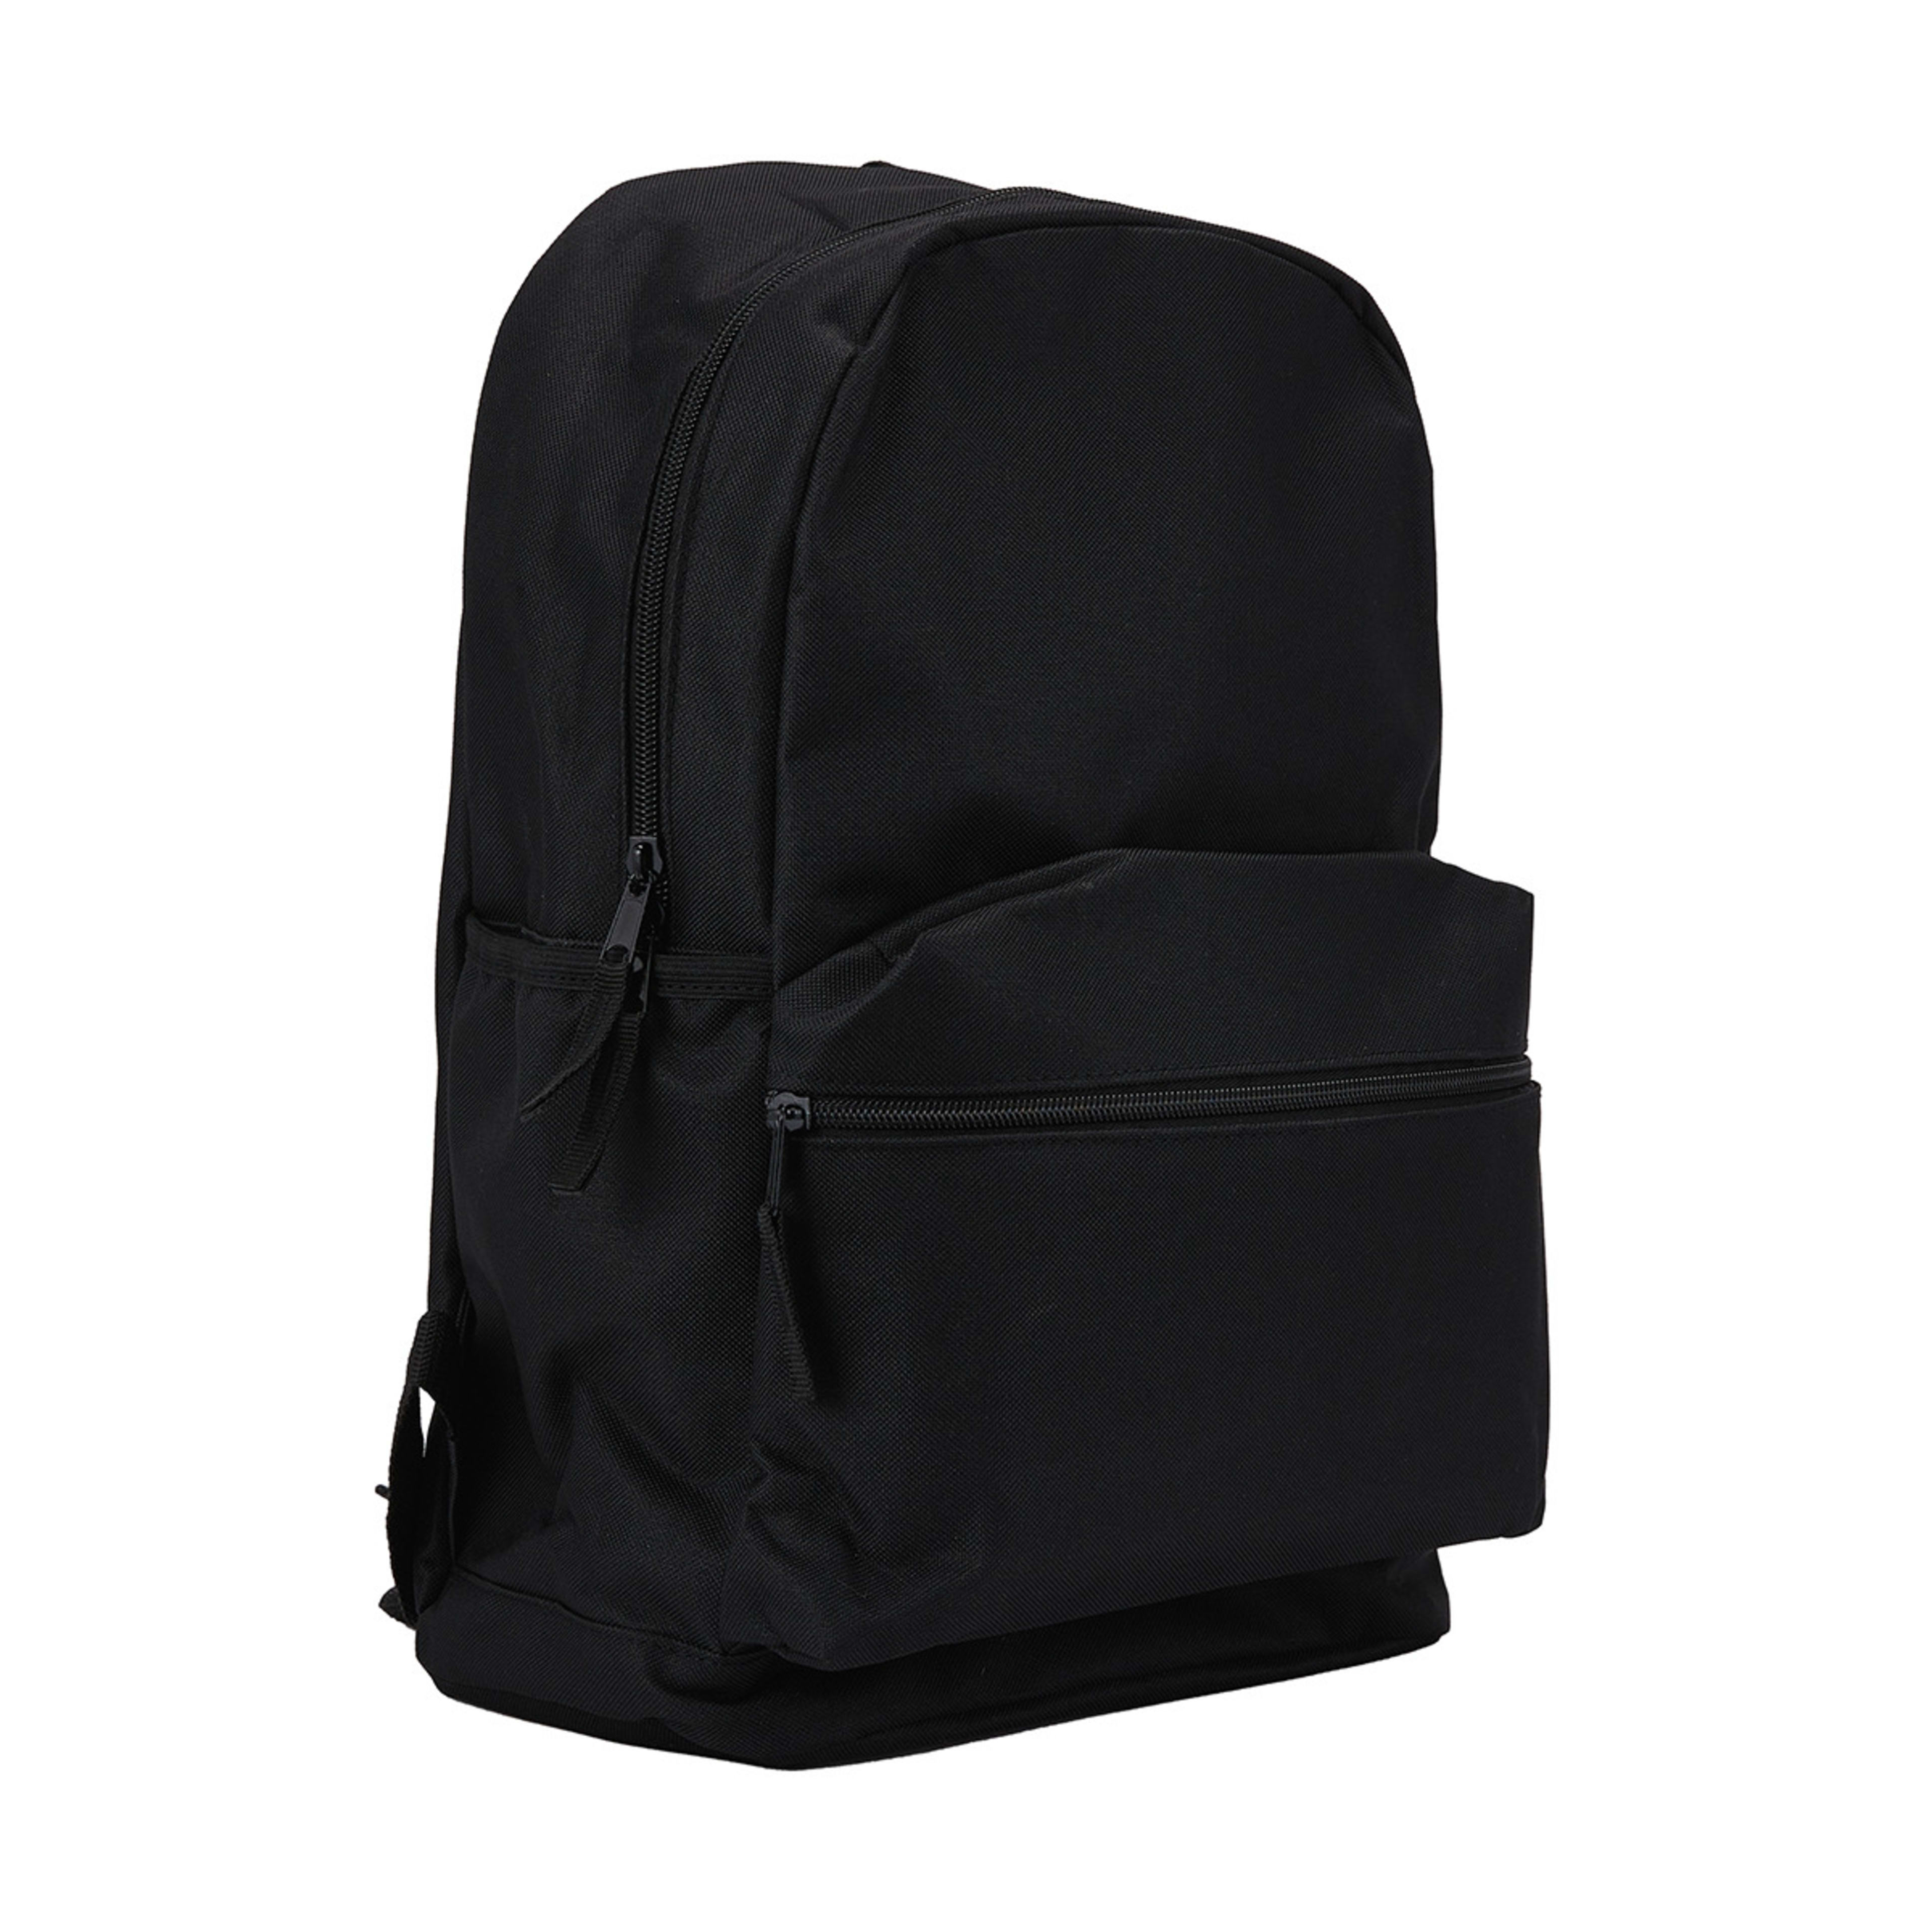 12.4L Classic Everyday Backpack - Black - Kmart